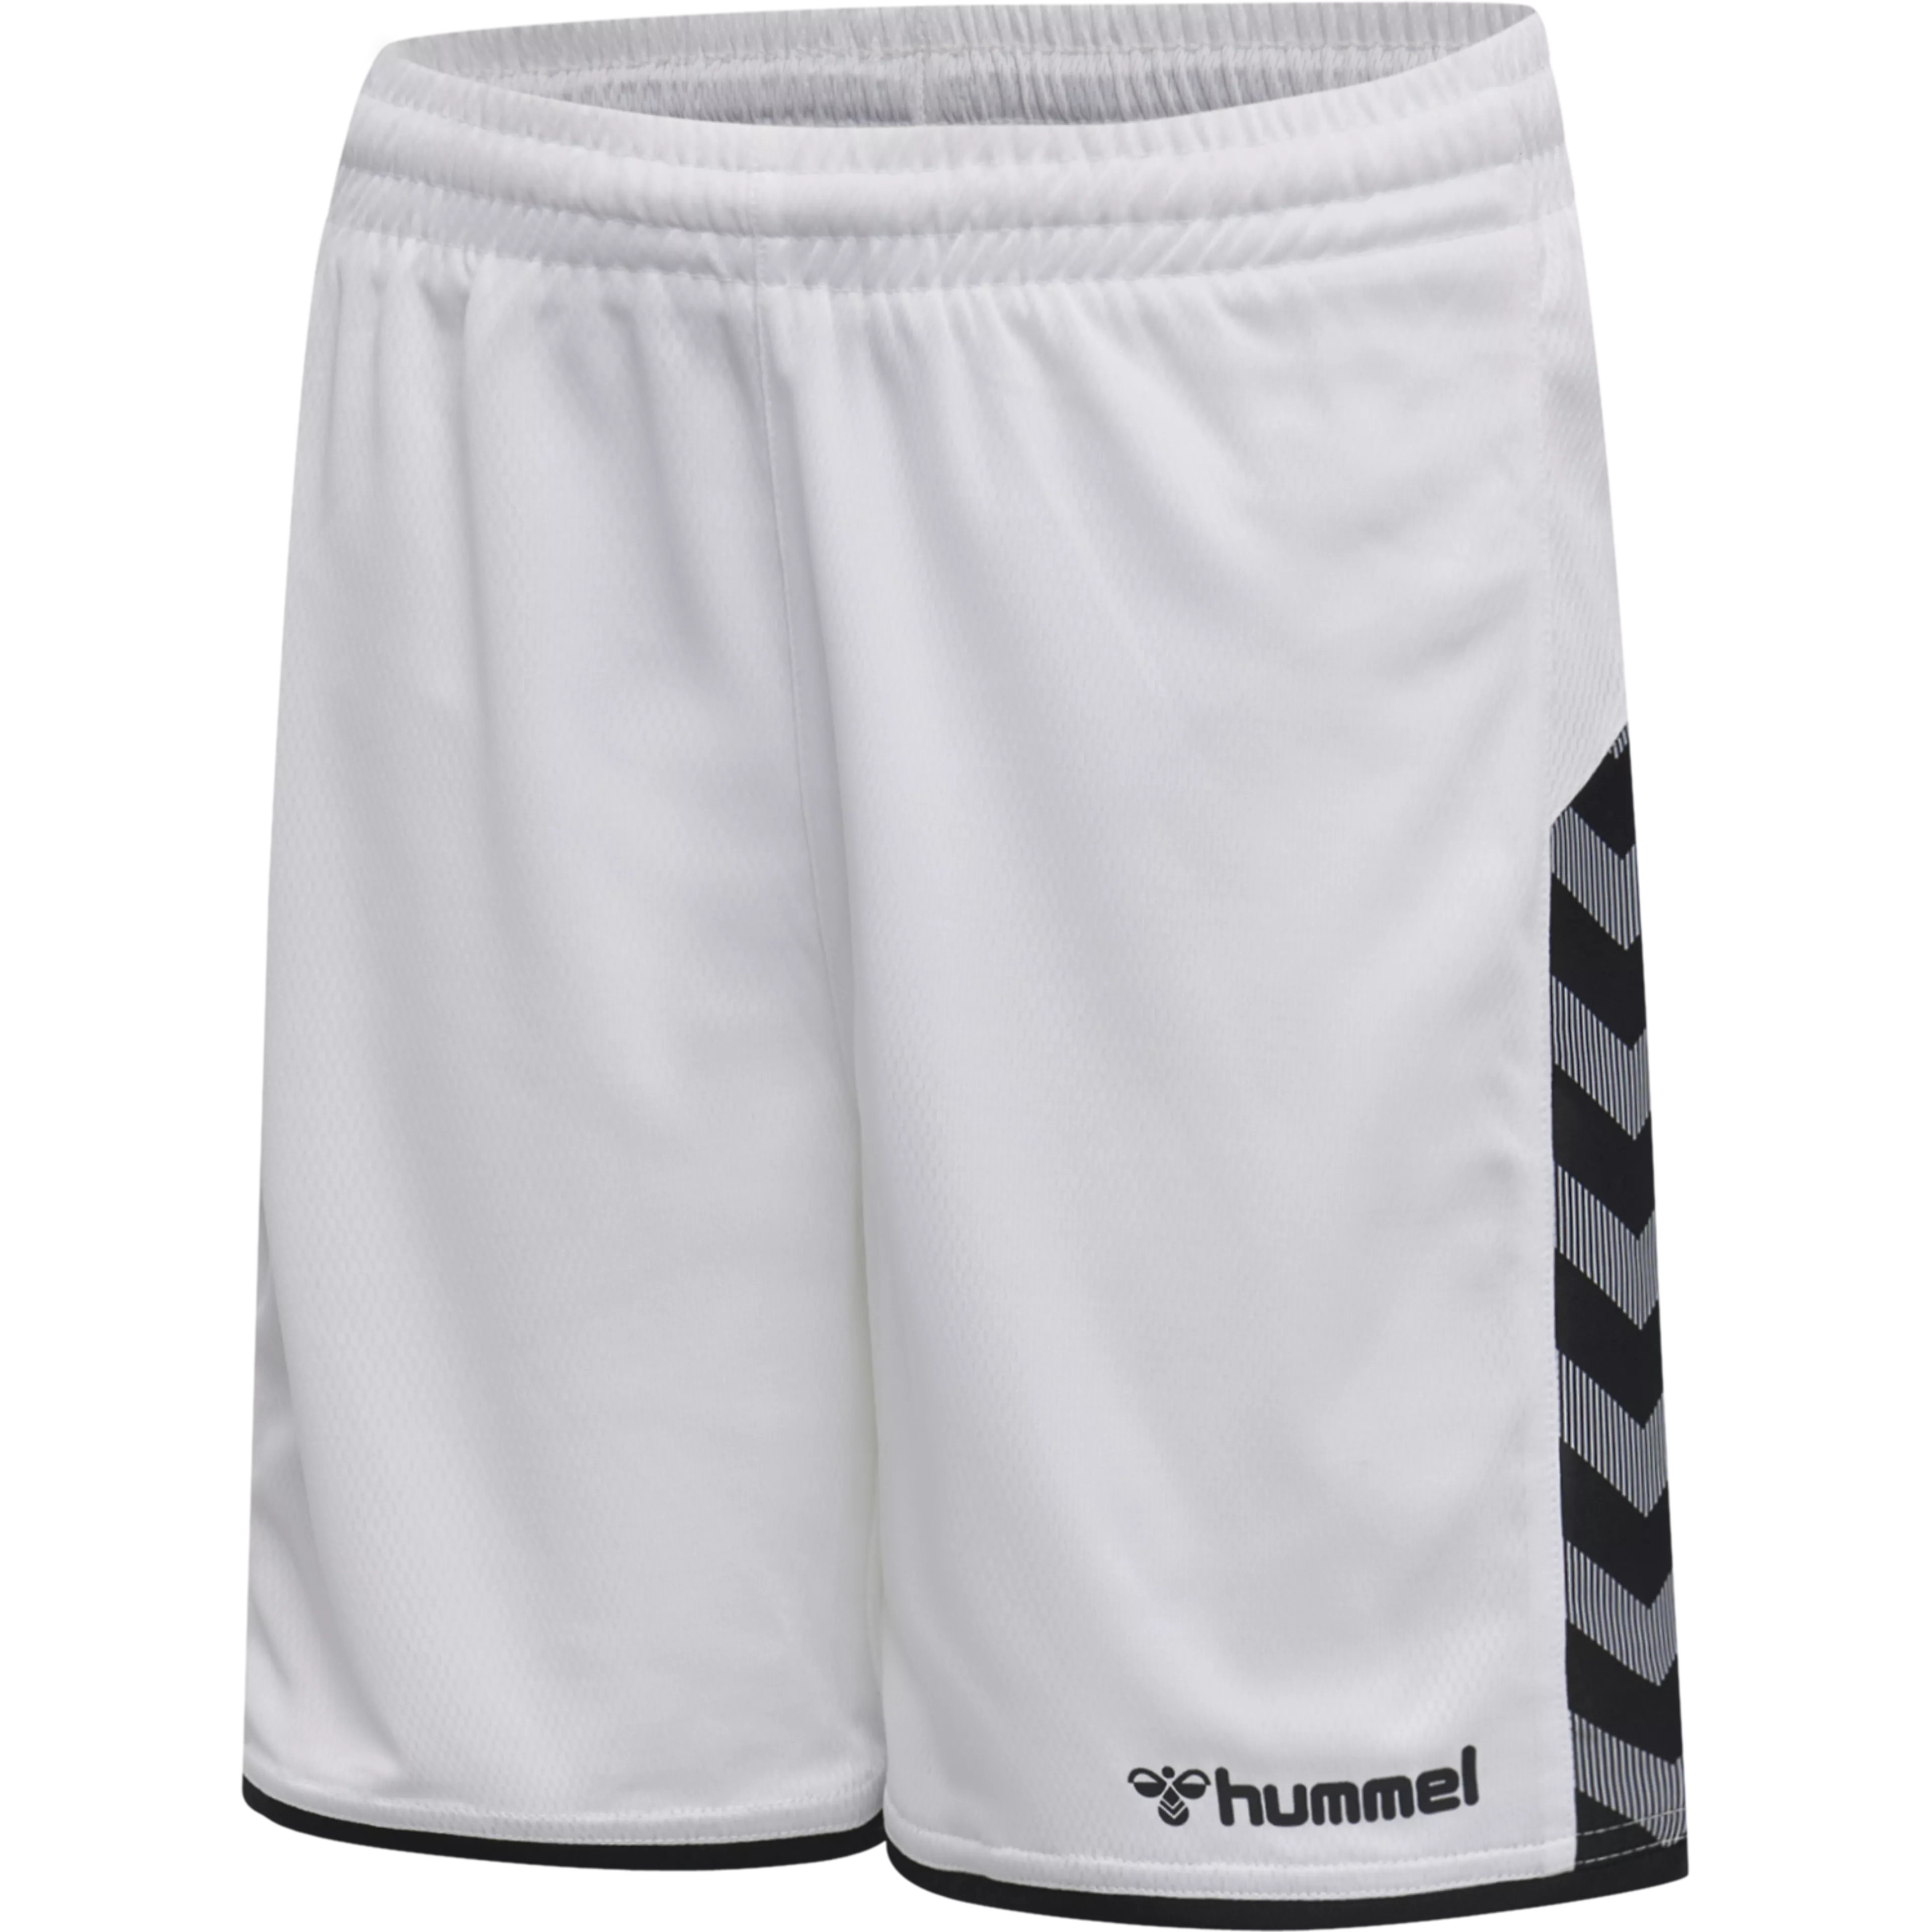 AUTHENTIC KIDS POLY SHORTS